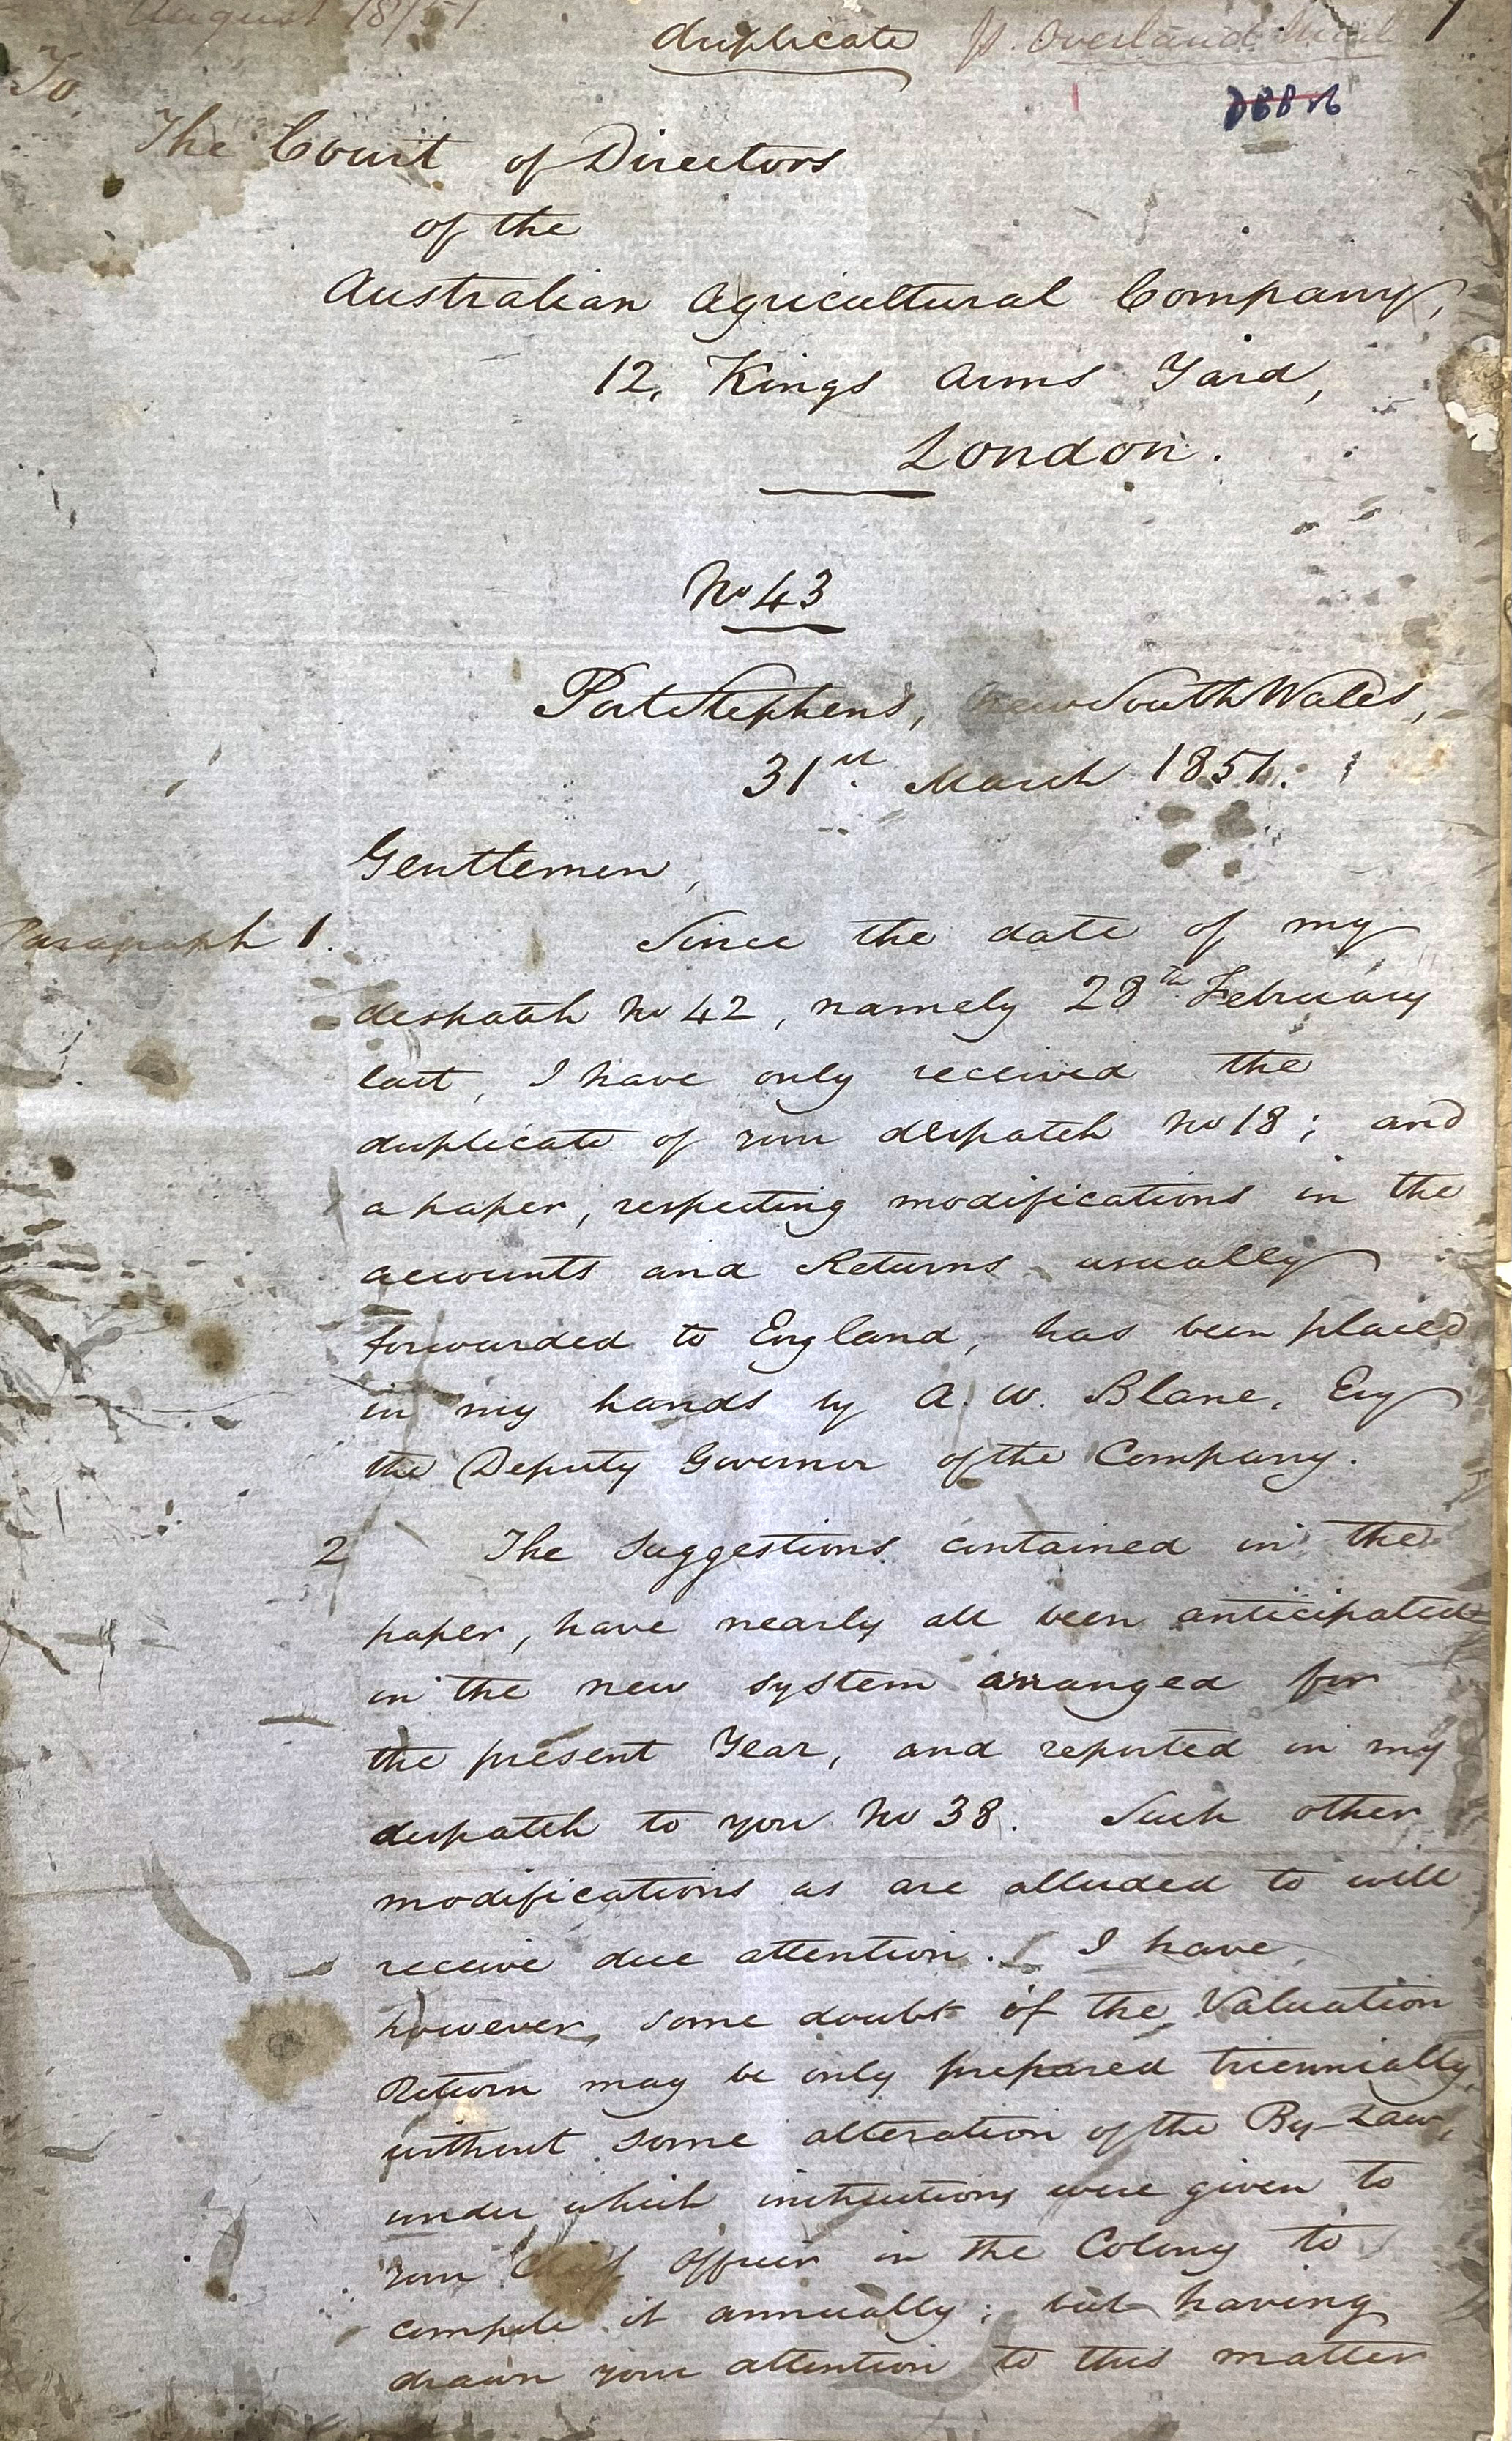 Despatch written by James Ebsworth, 31 March 1851. This is the only despatch that remains from Ebsworth's second period of administration as Acting General Superintendent between 1848-51.